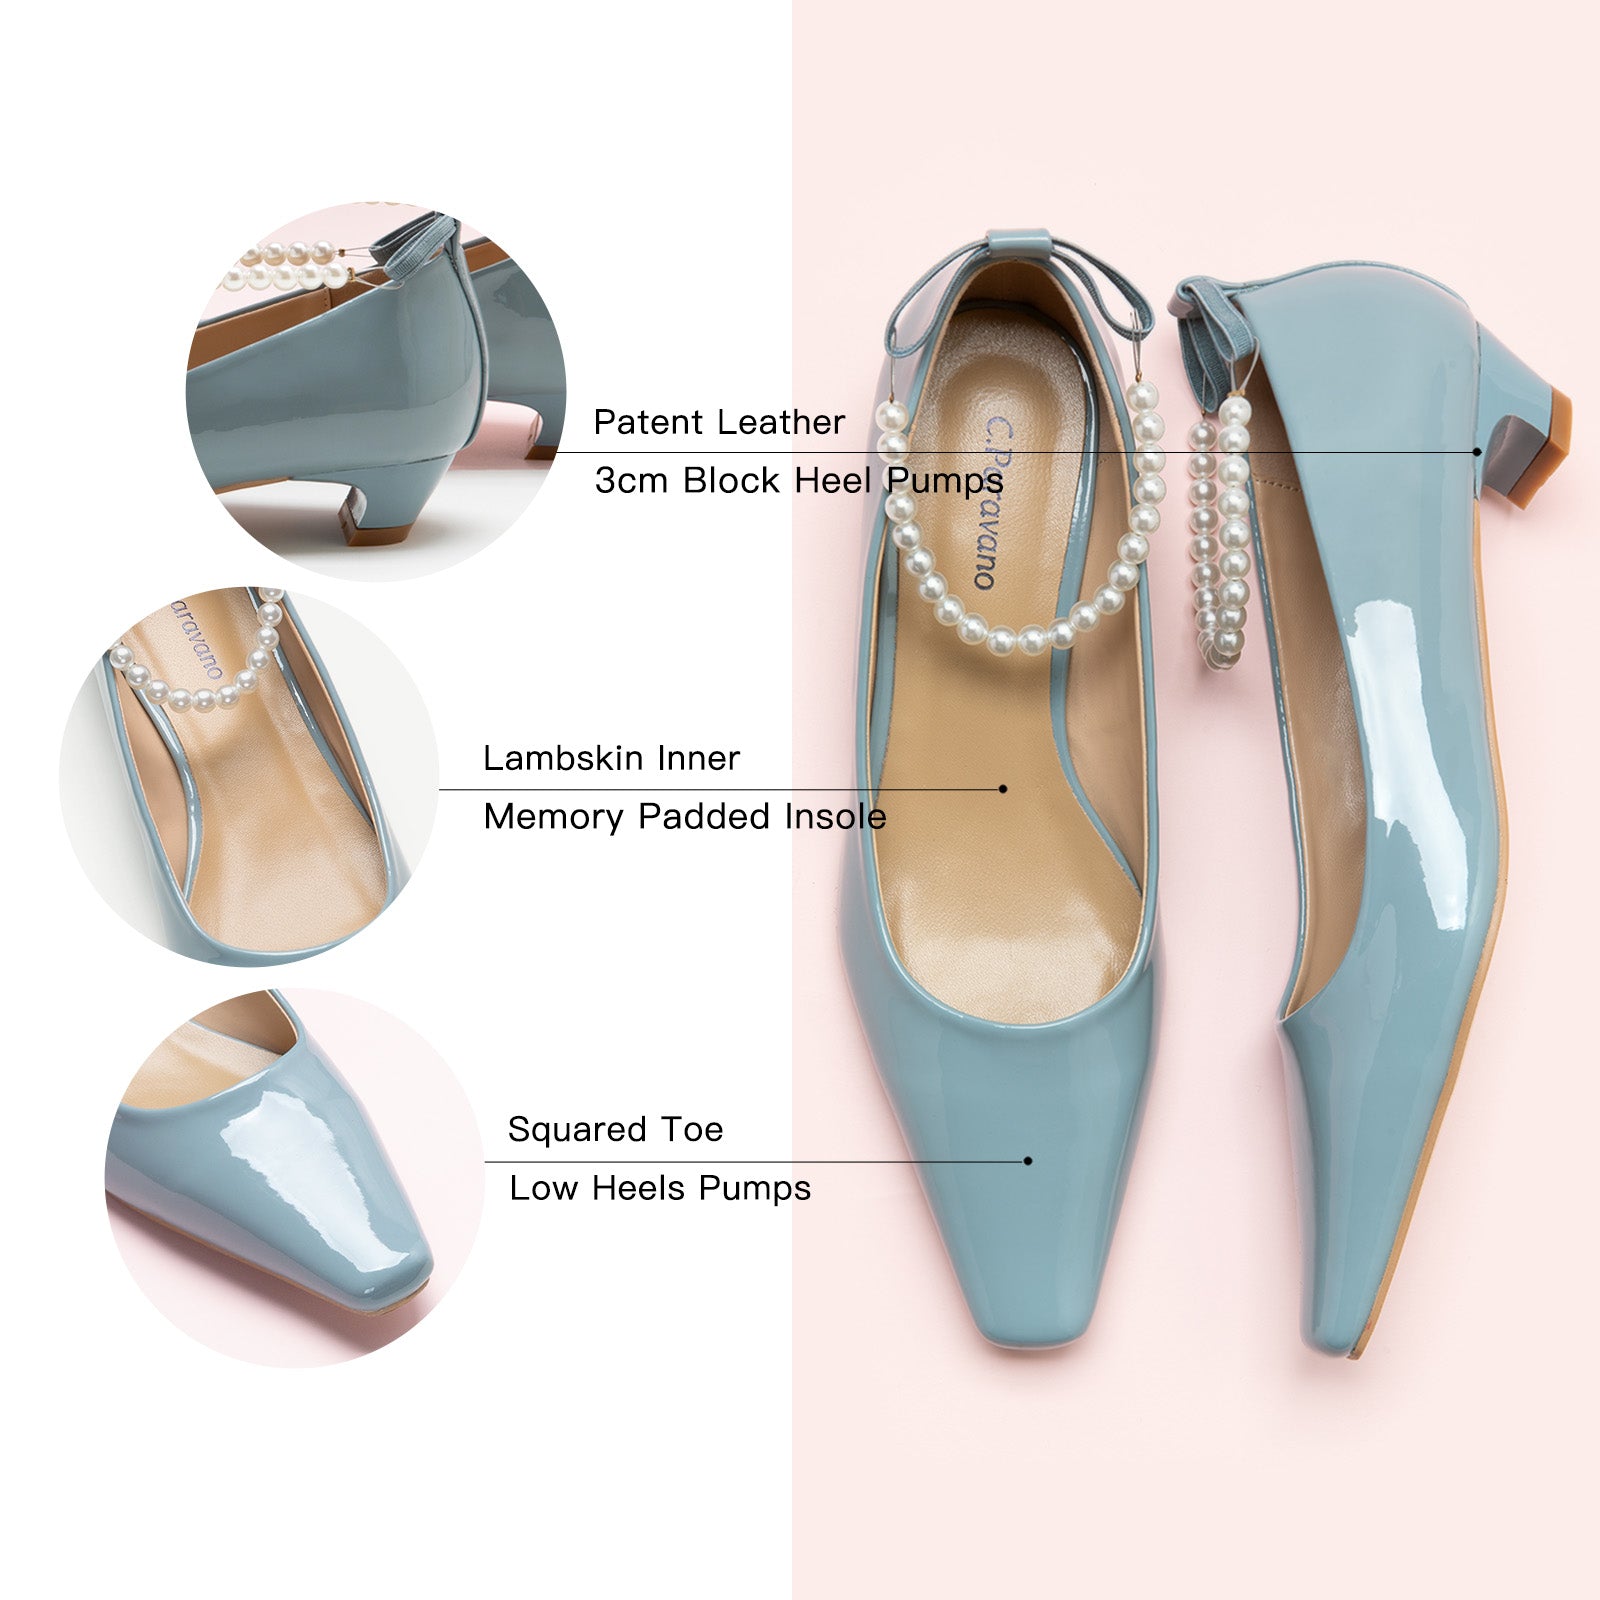 Sky Low Heel with pearl straps, a serene and elegant addition to your shoe collection